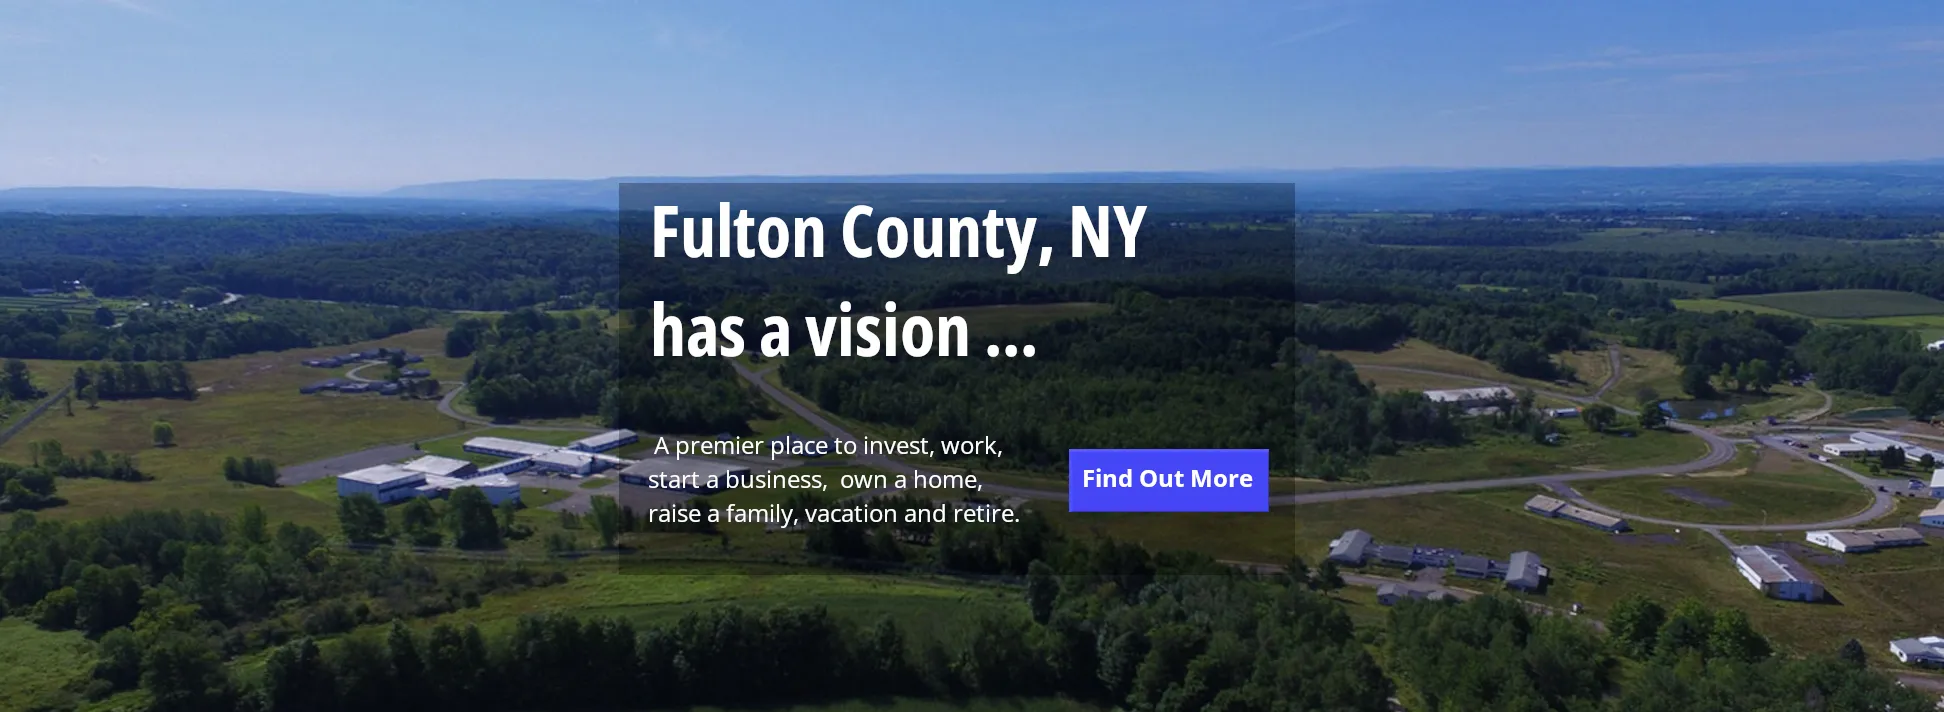 Fulton County's Vision